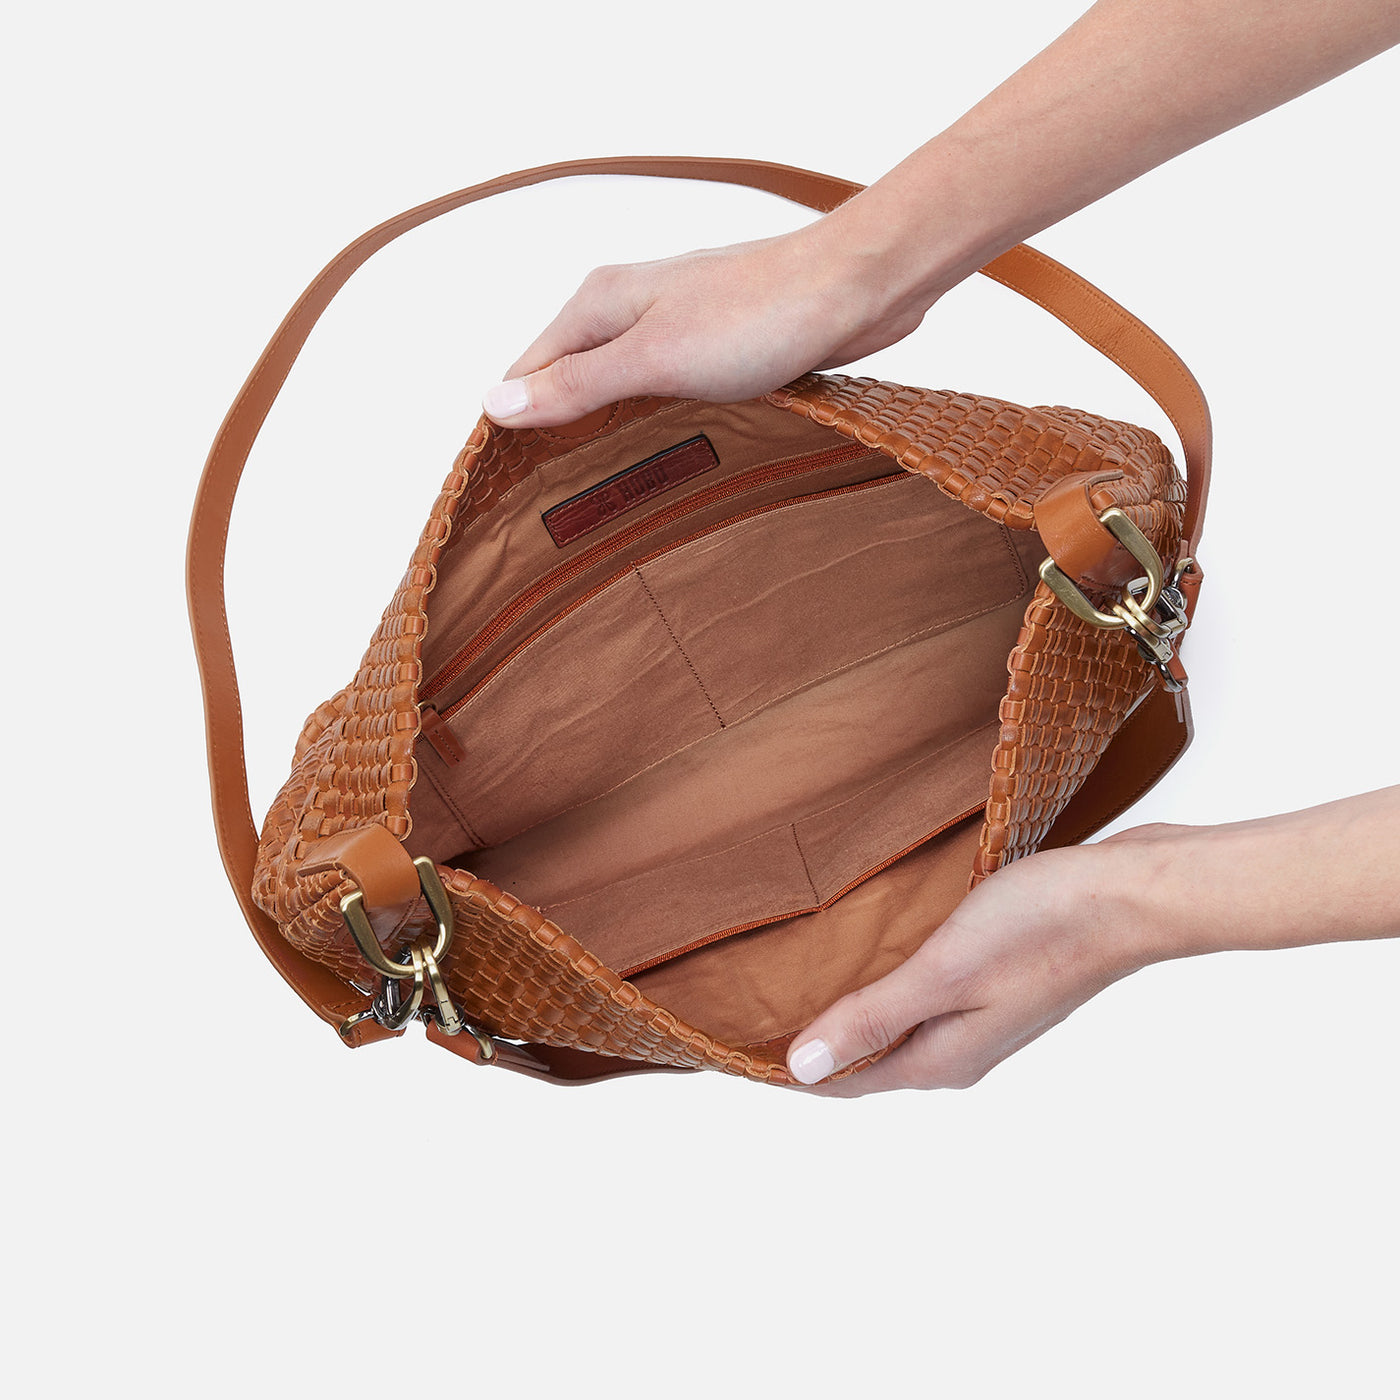 Pier Shoulder Bag in Wave Weave Leather - Wheat